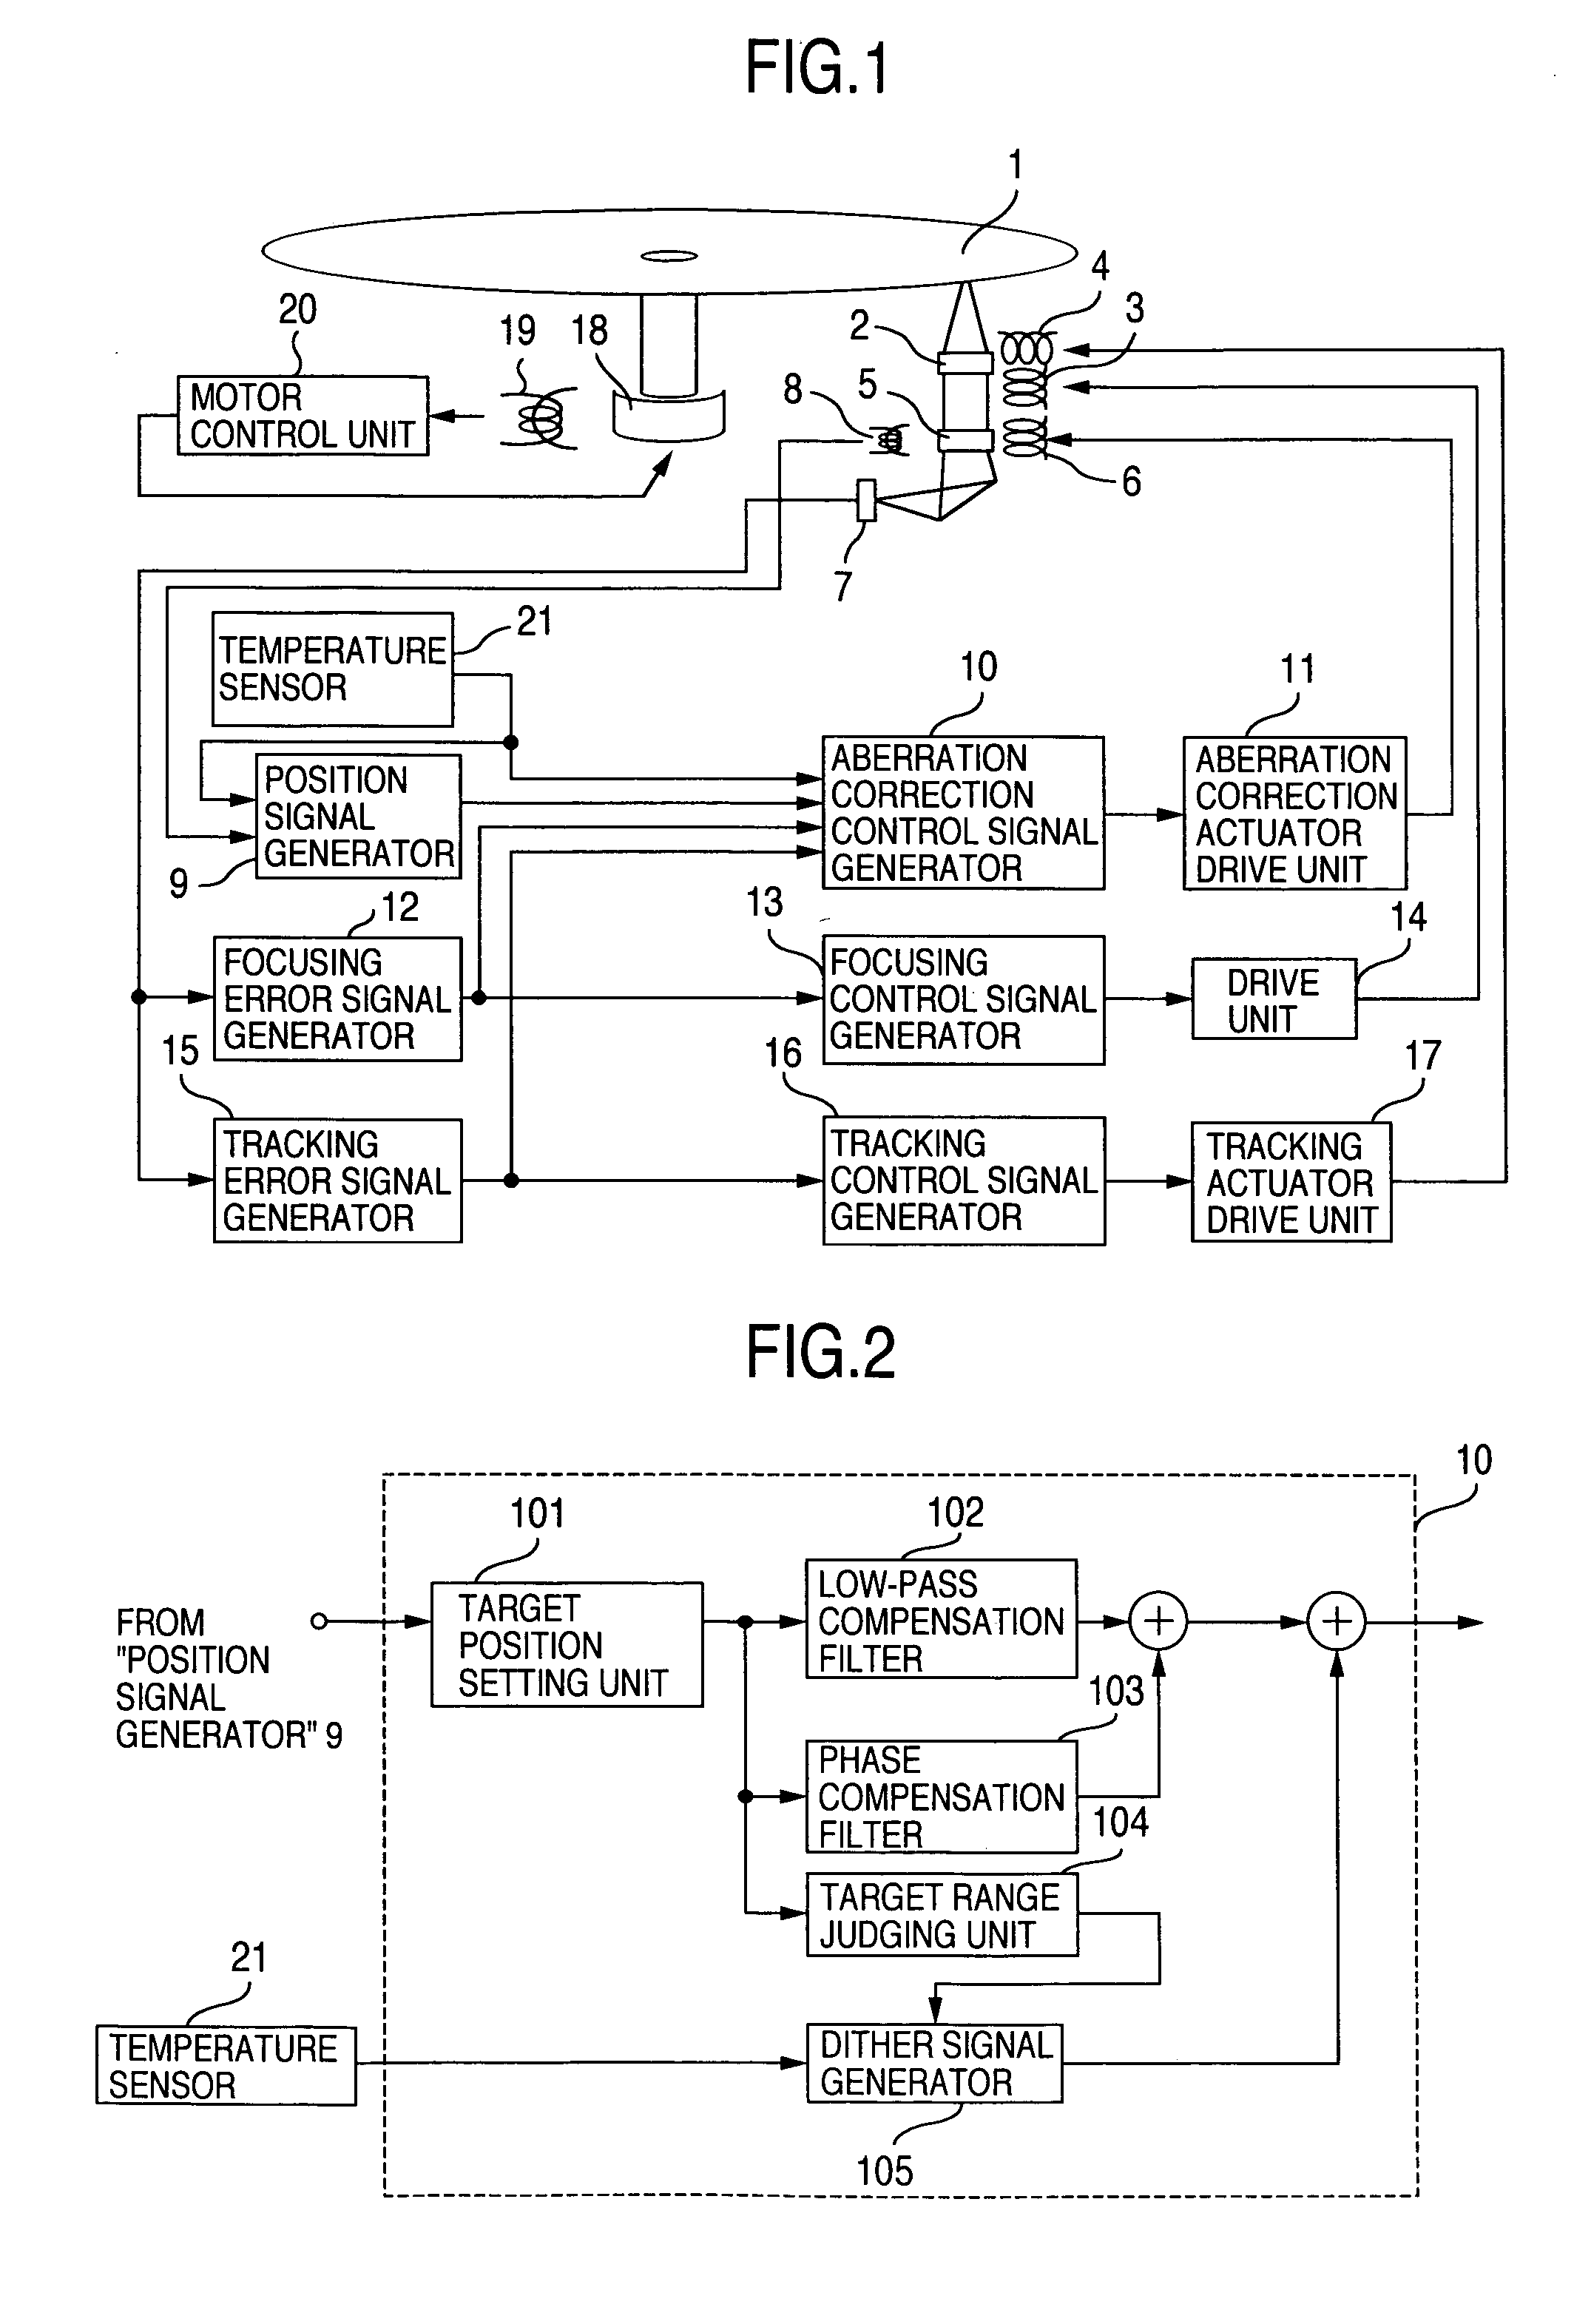 Optical disk device